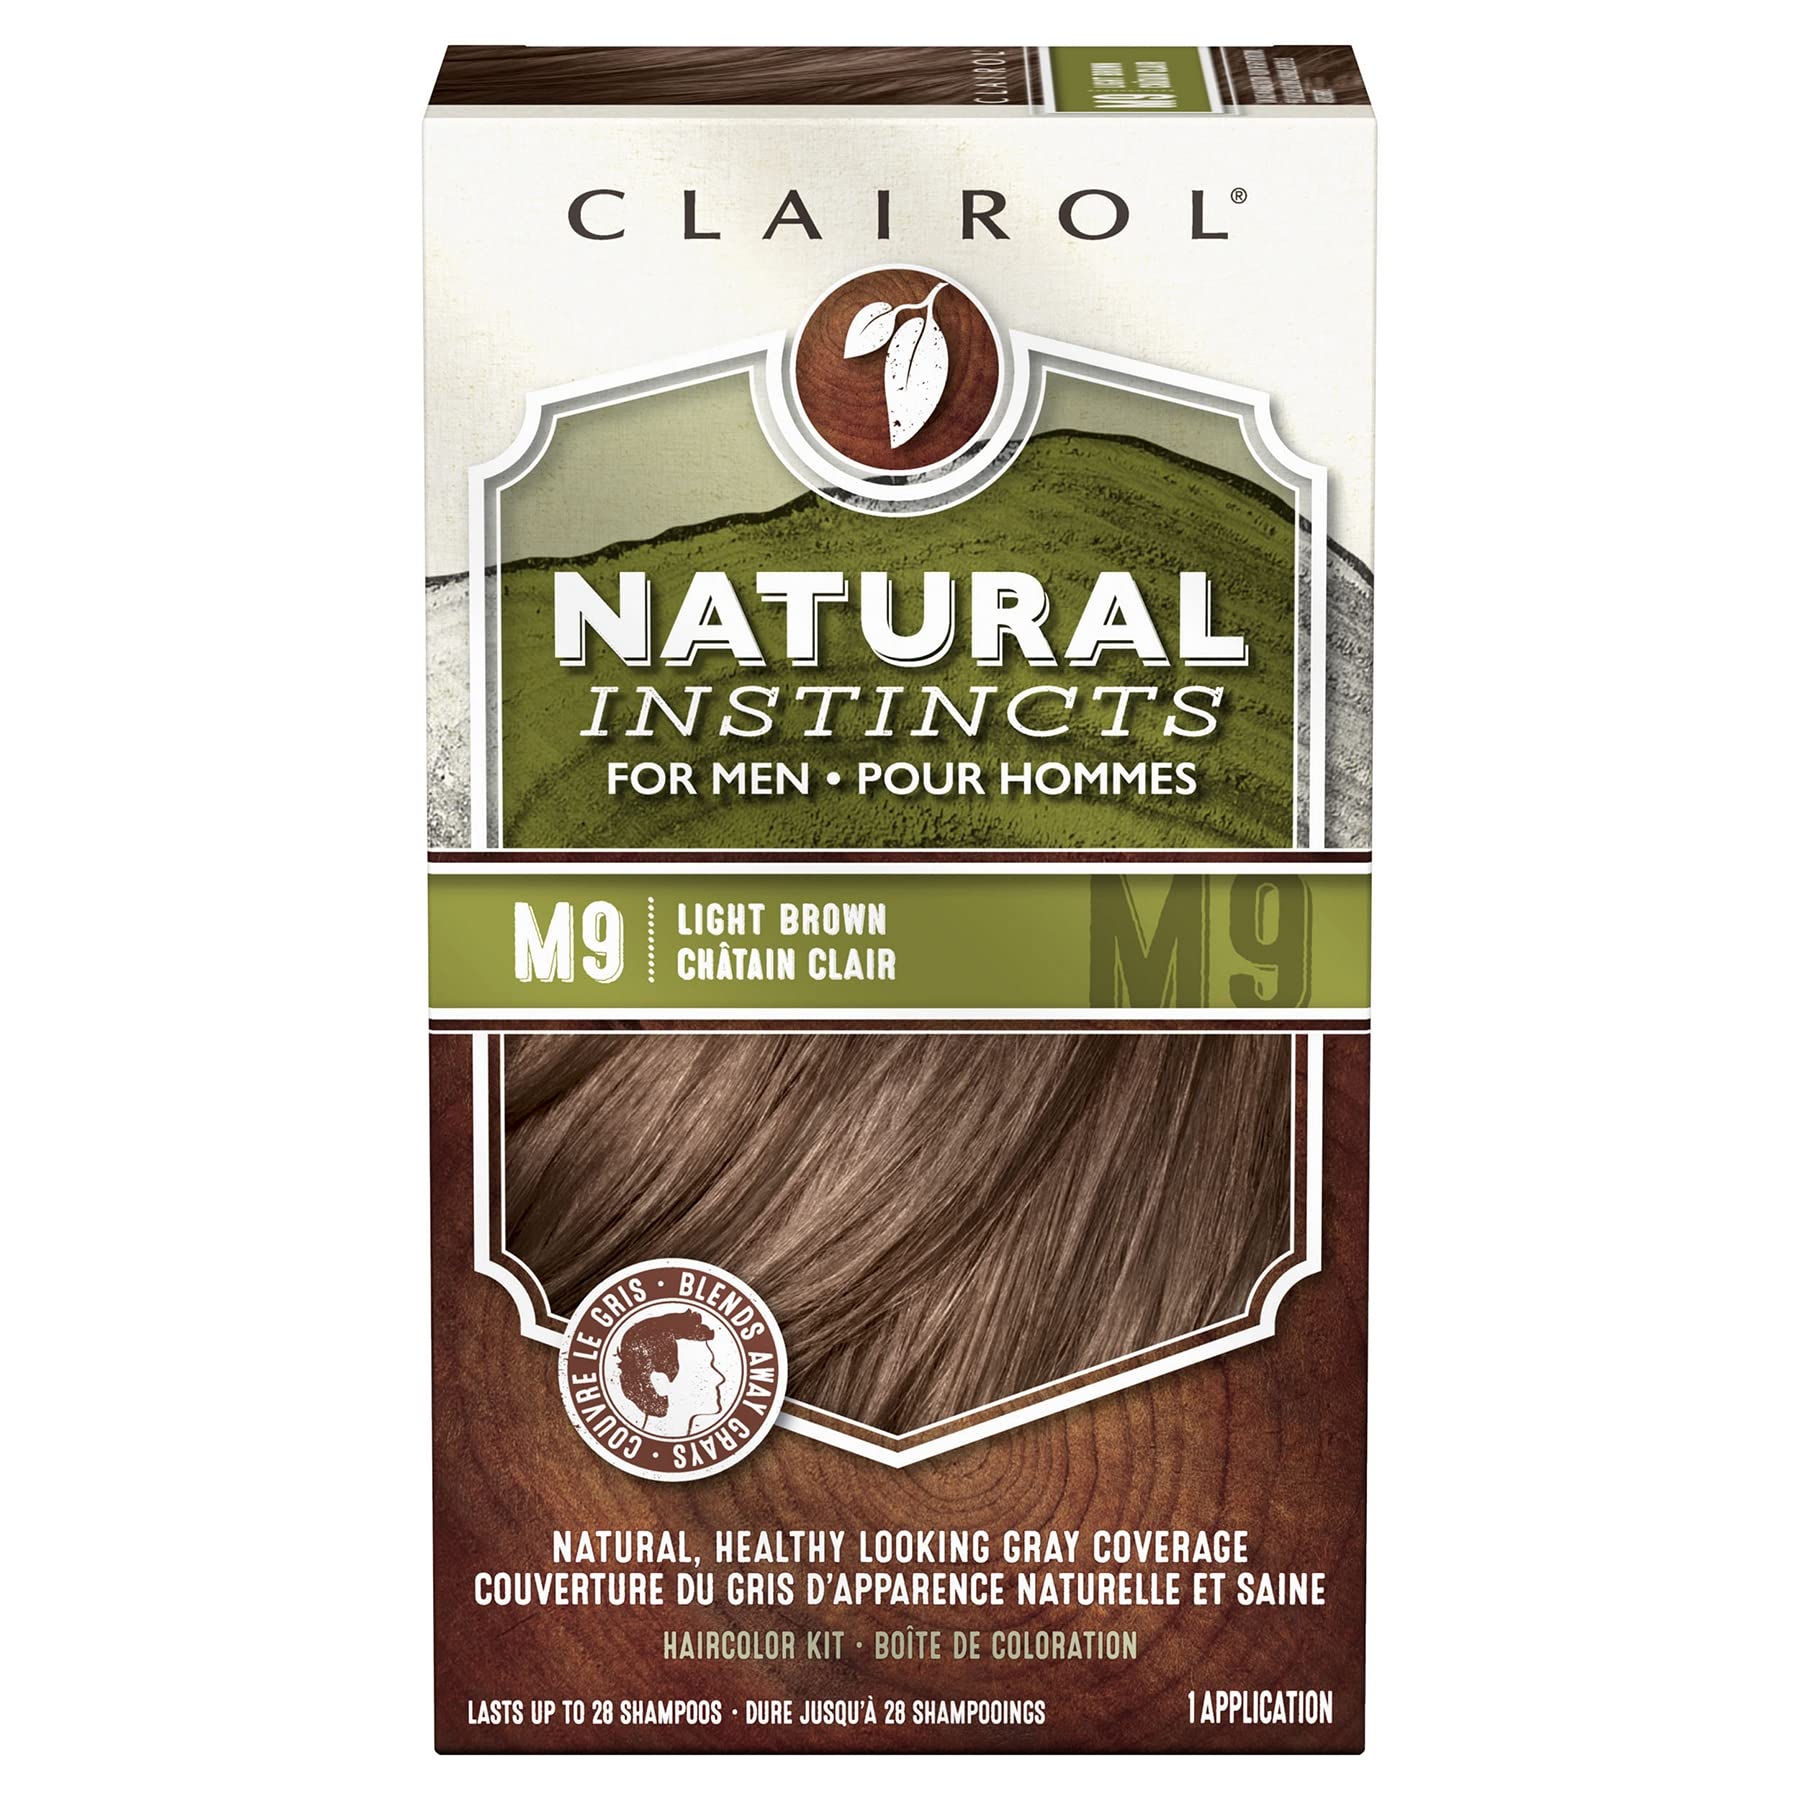 Clairol Natural Instincts Demi-Permanent Hair Dye for Men, M9 Light Brown Hair Color, Pack of 1